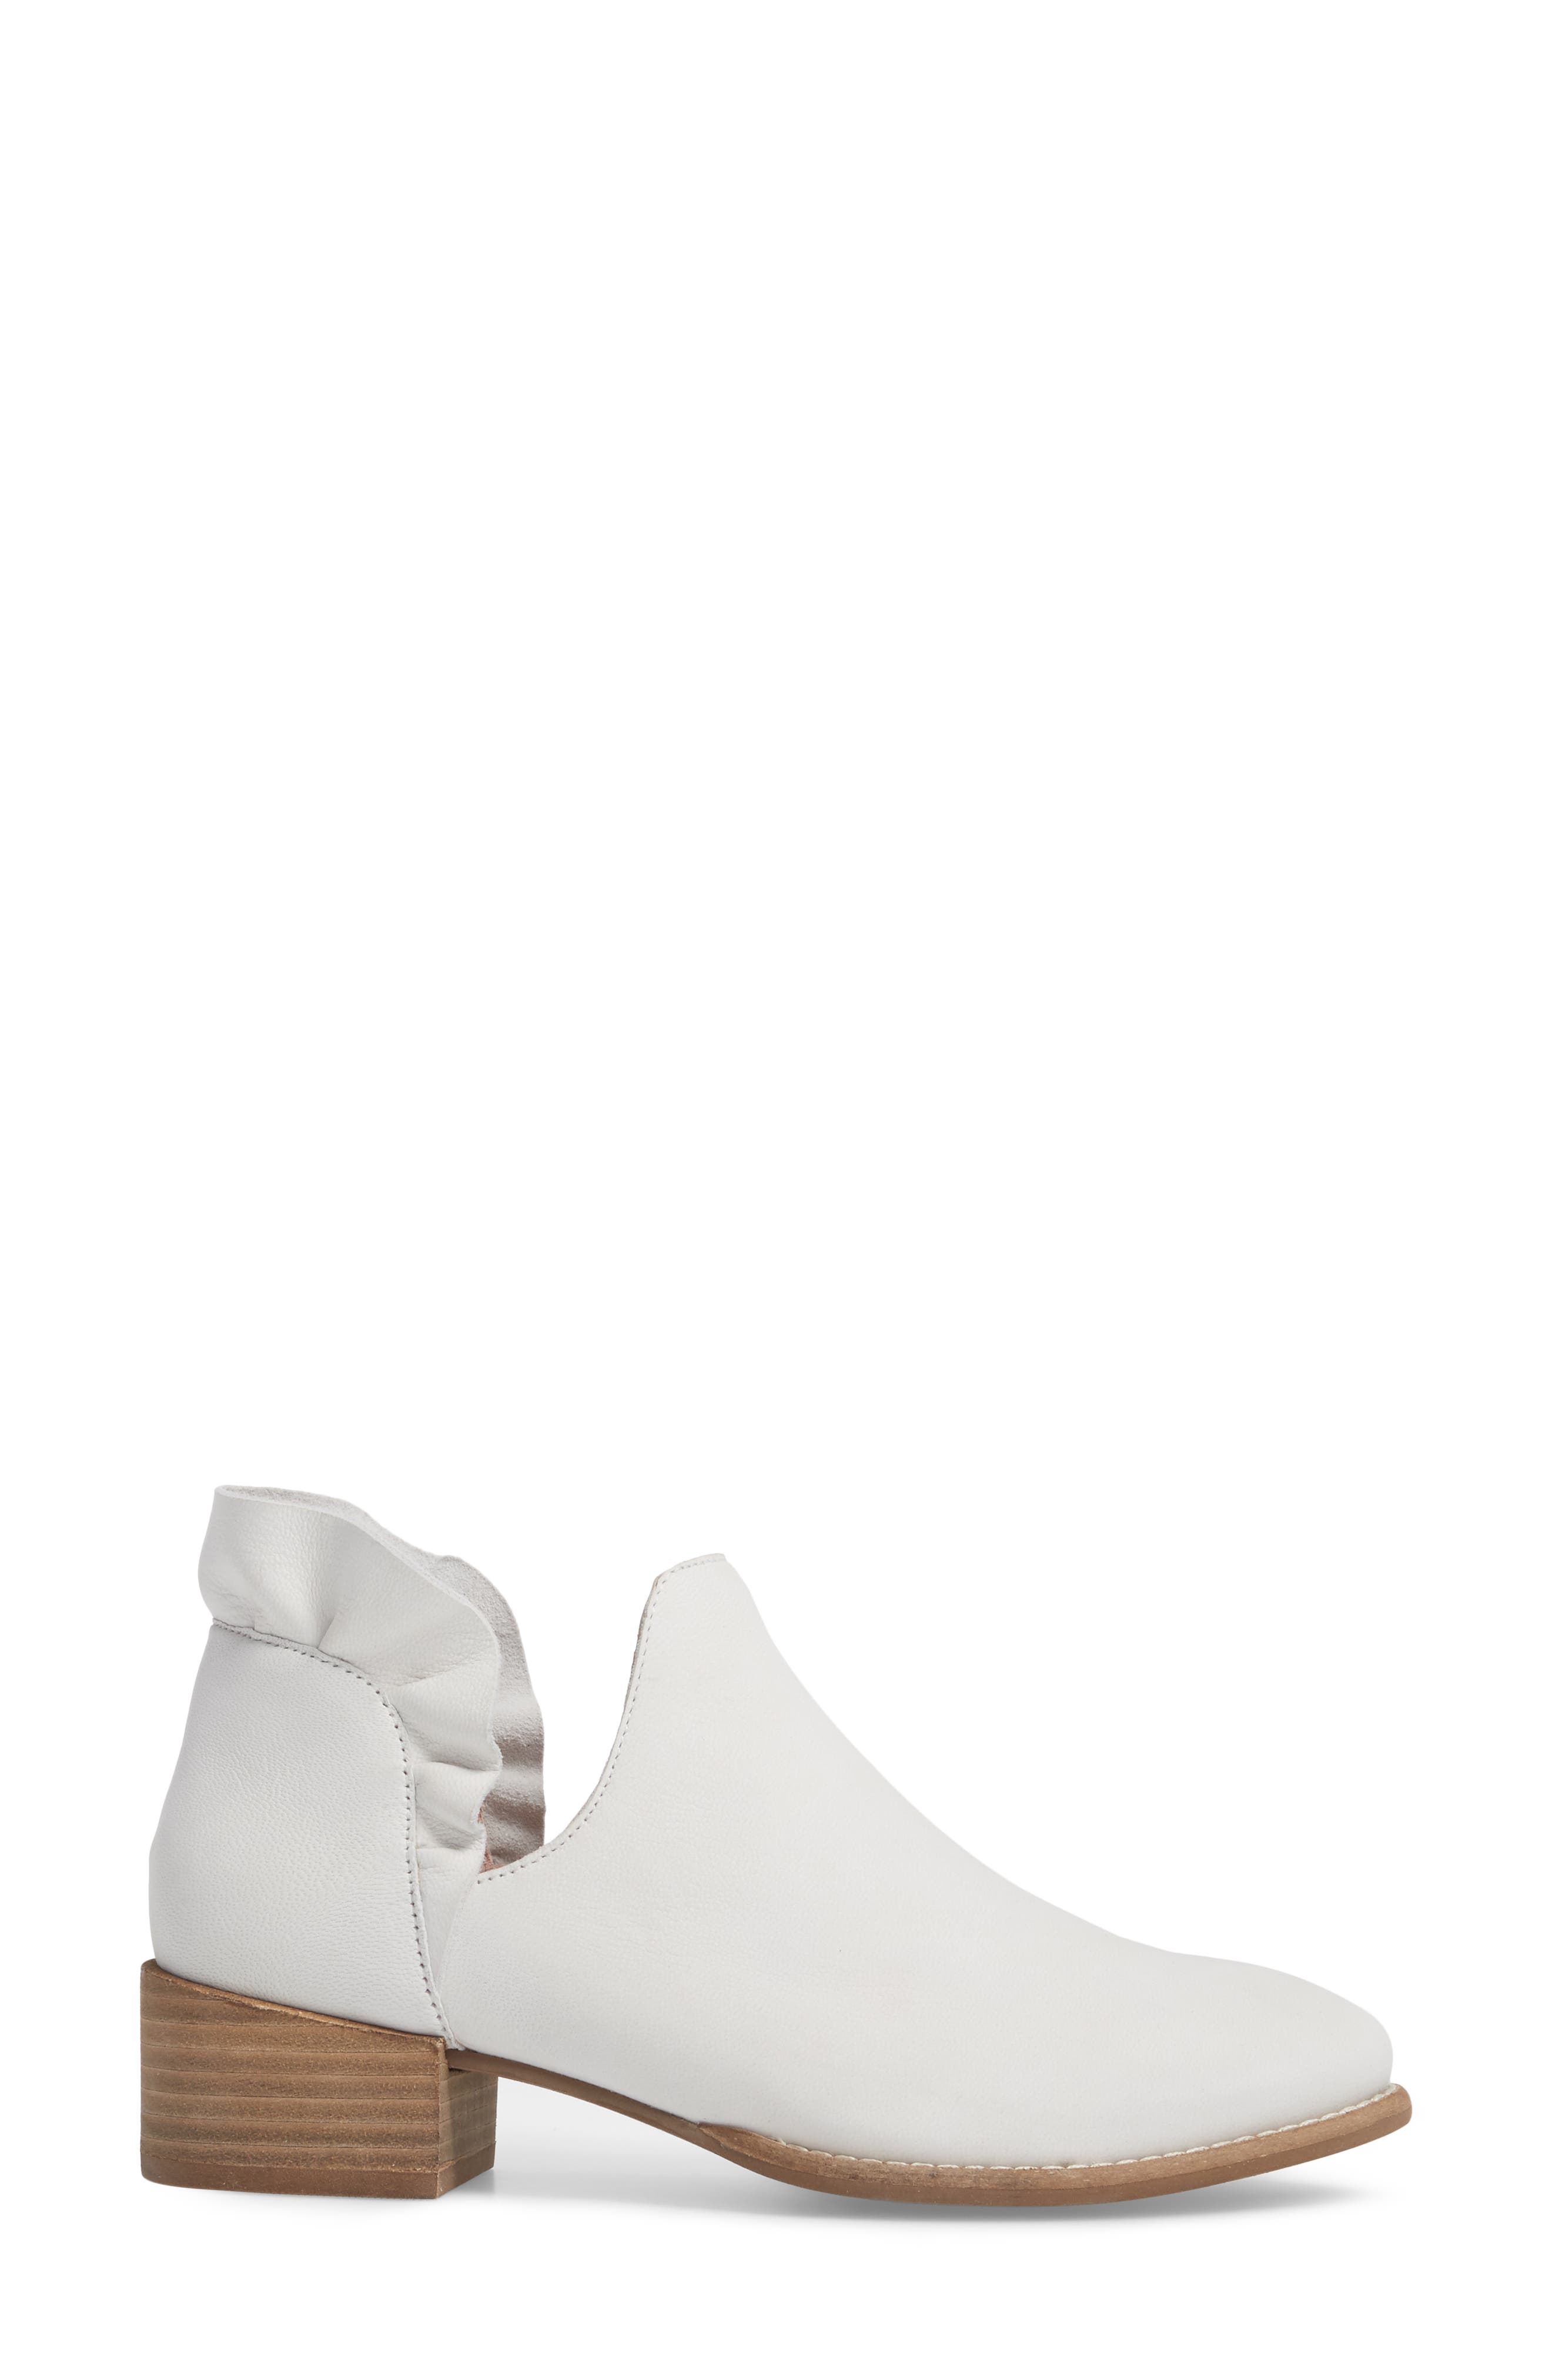 seychelles renowned ruffle bootie